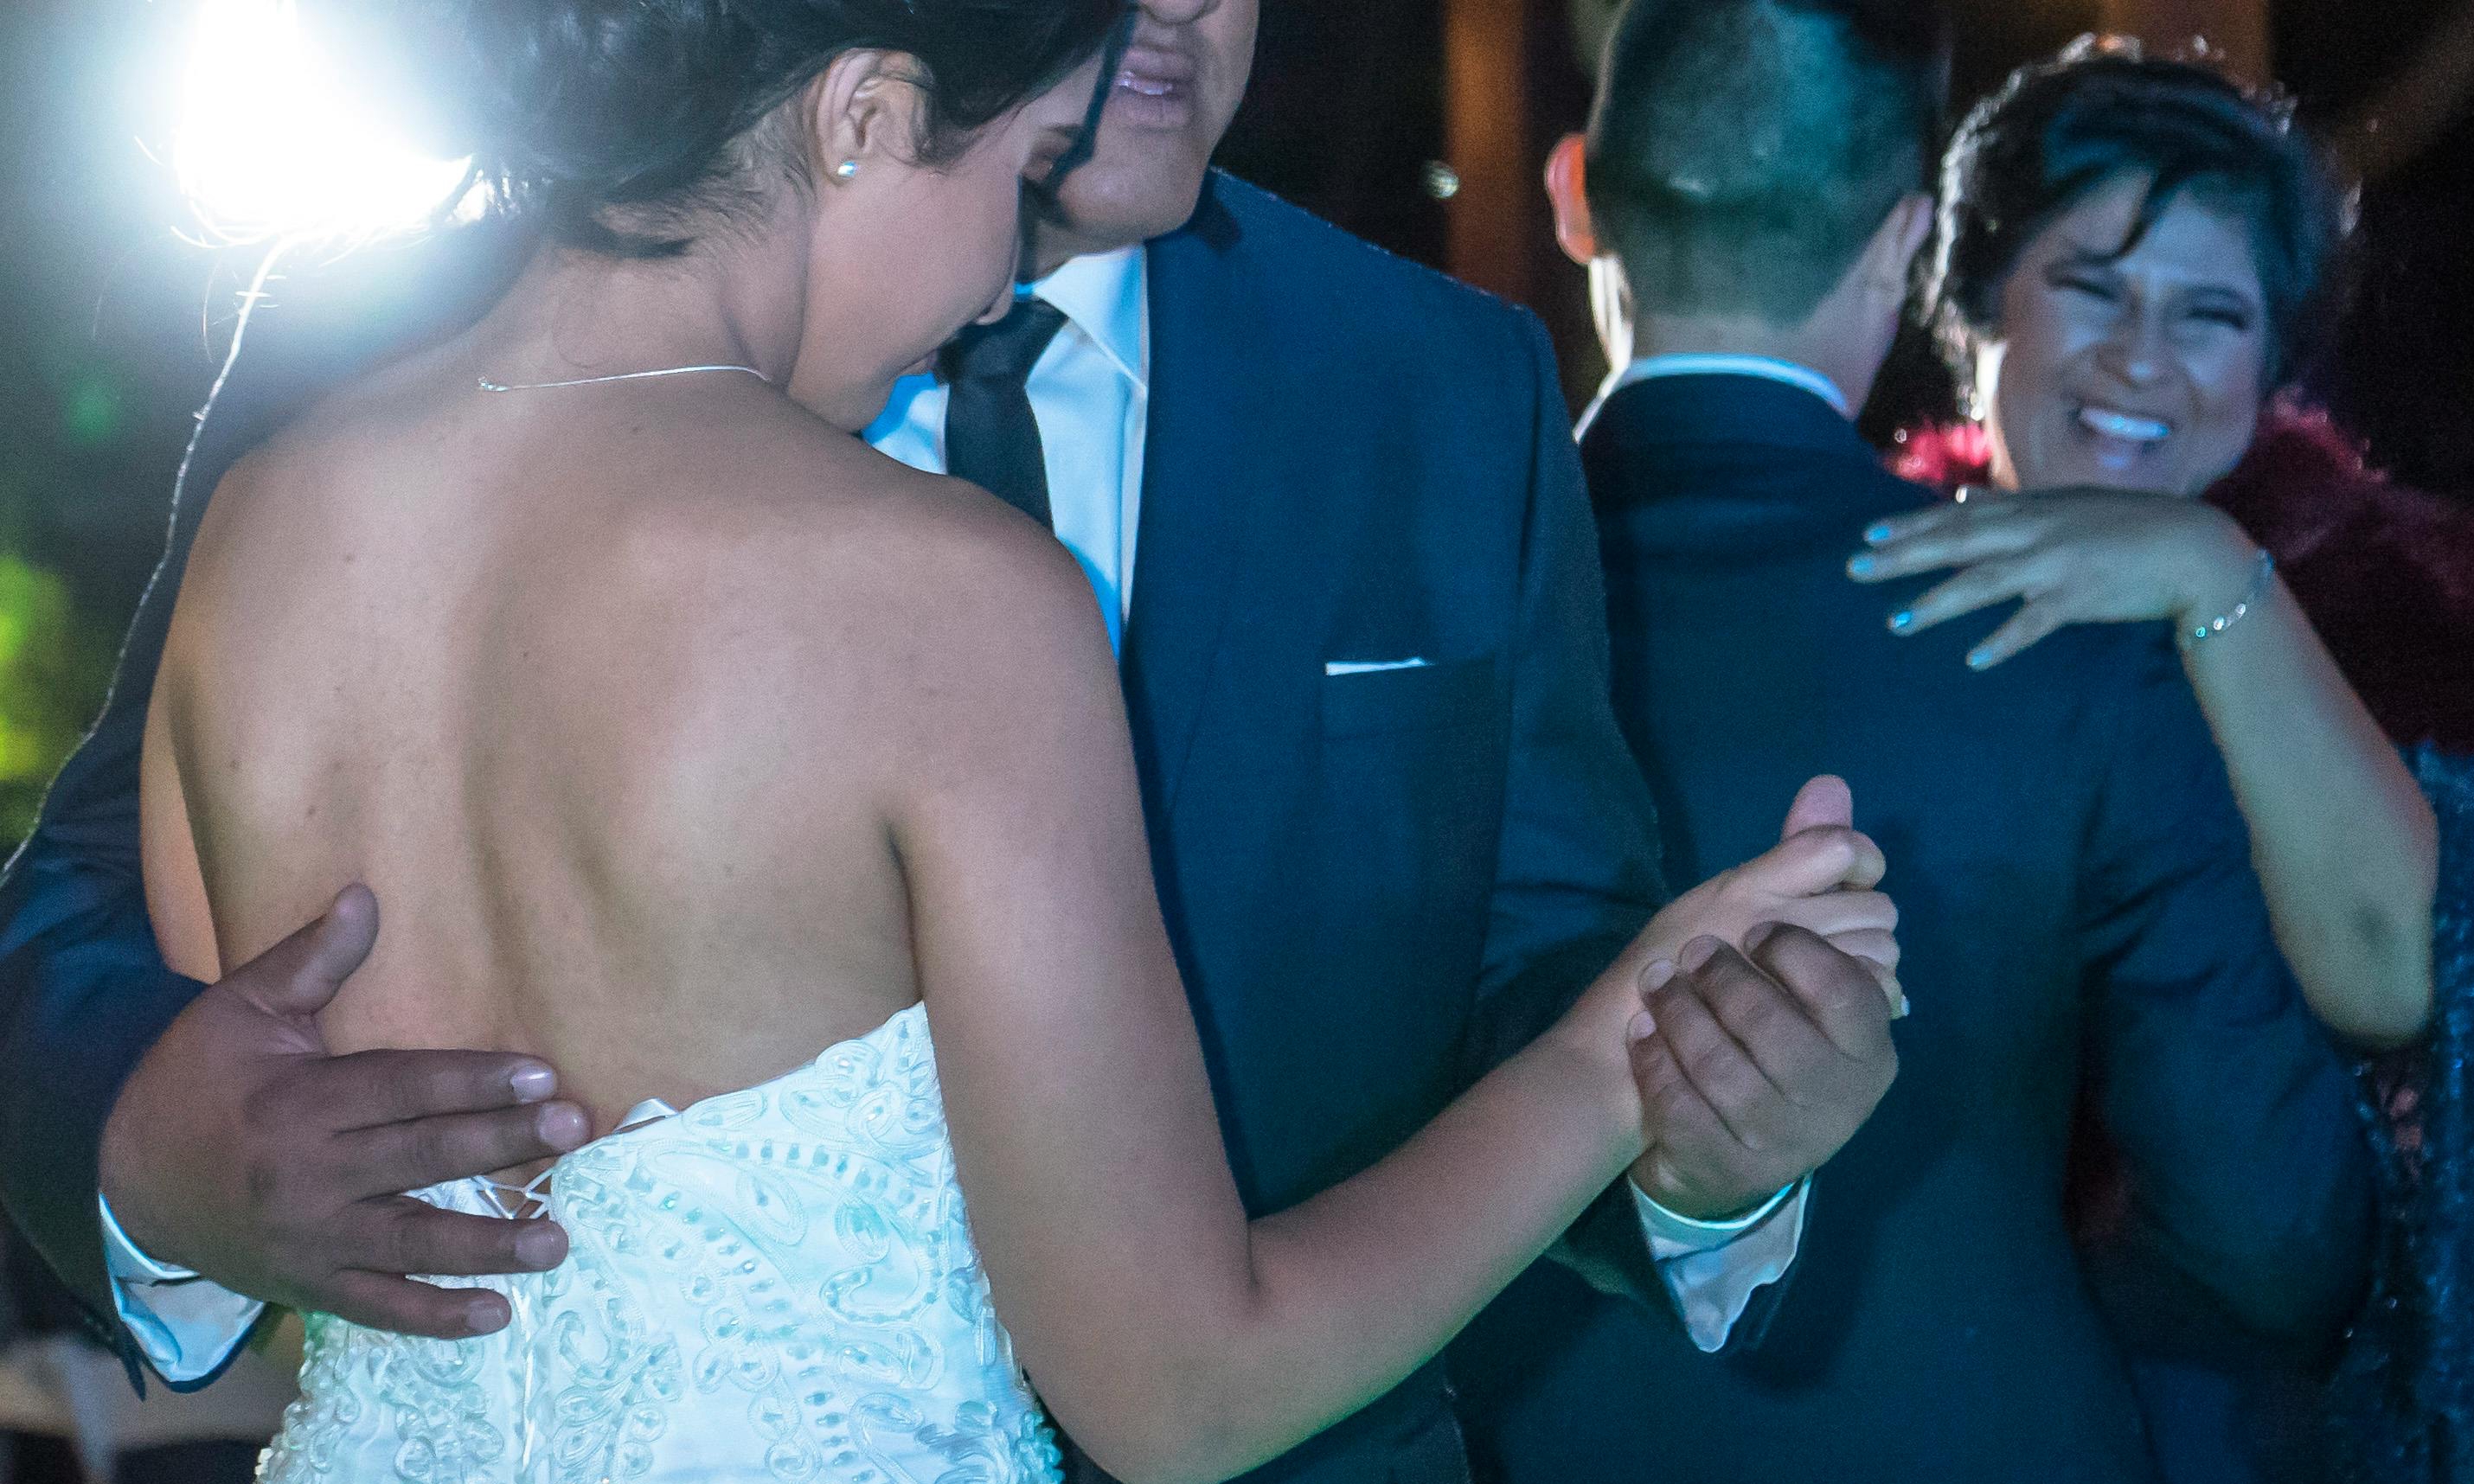 Kaia dancing with her stepfather, Jerry R. | Source: Pexels